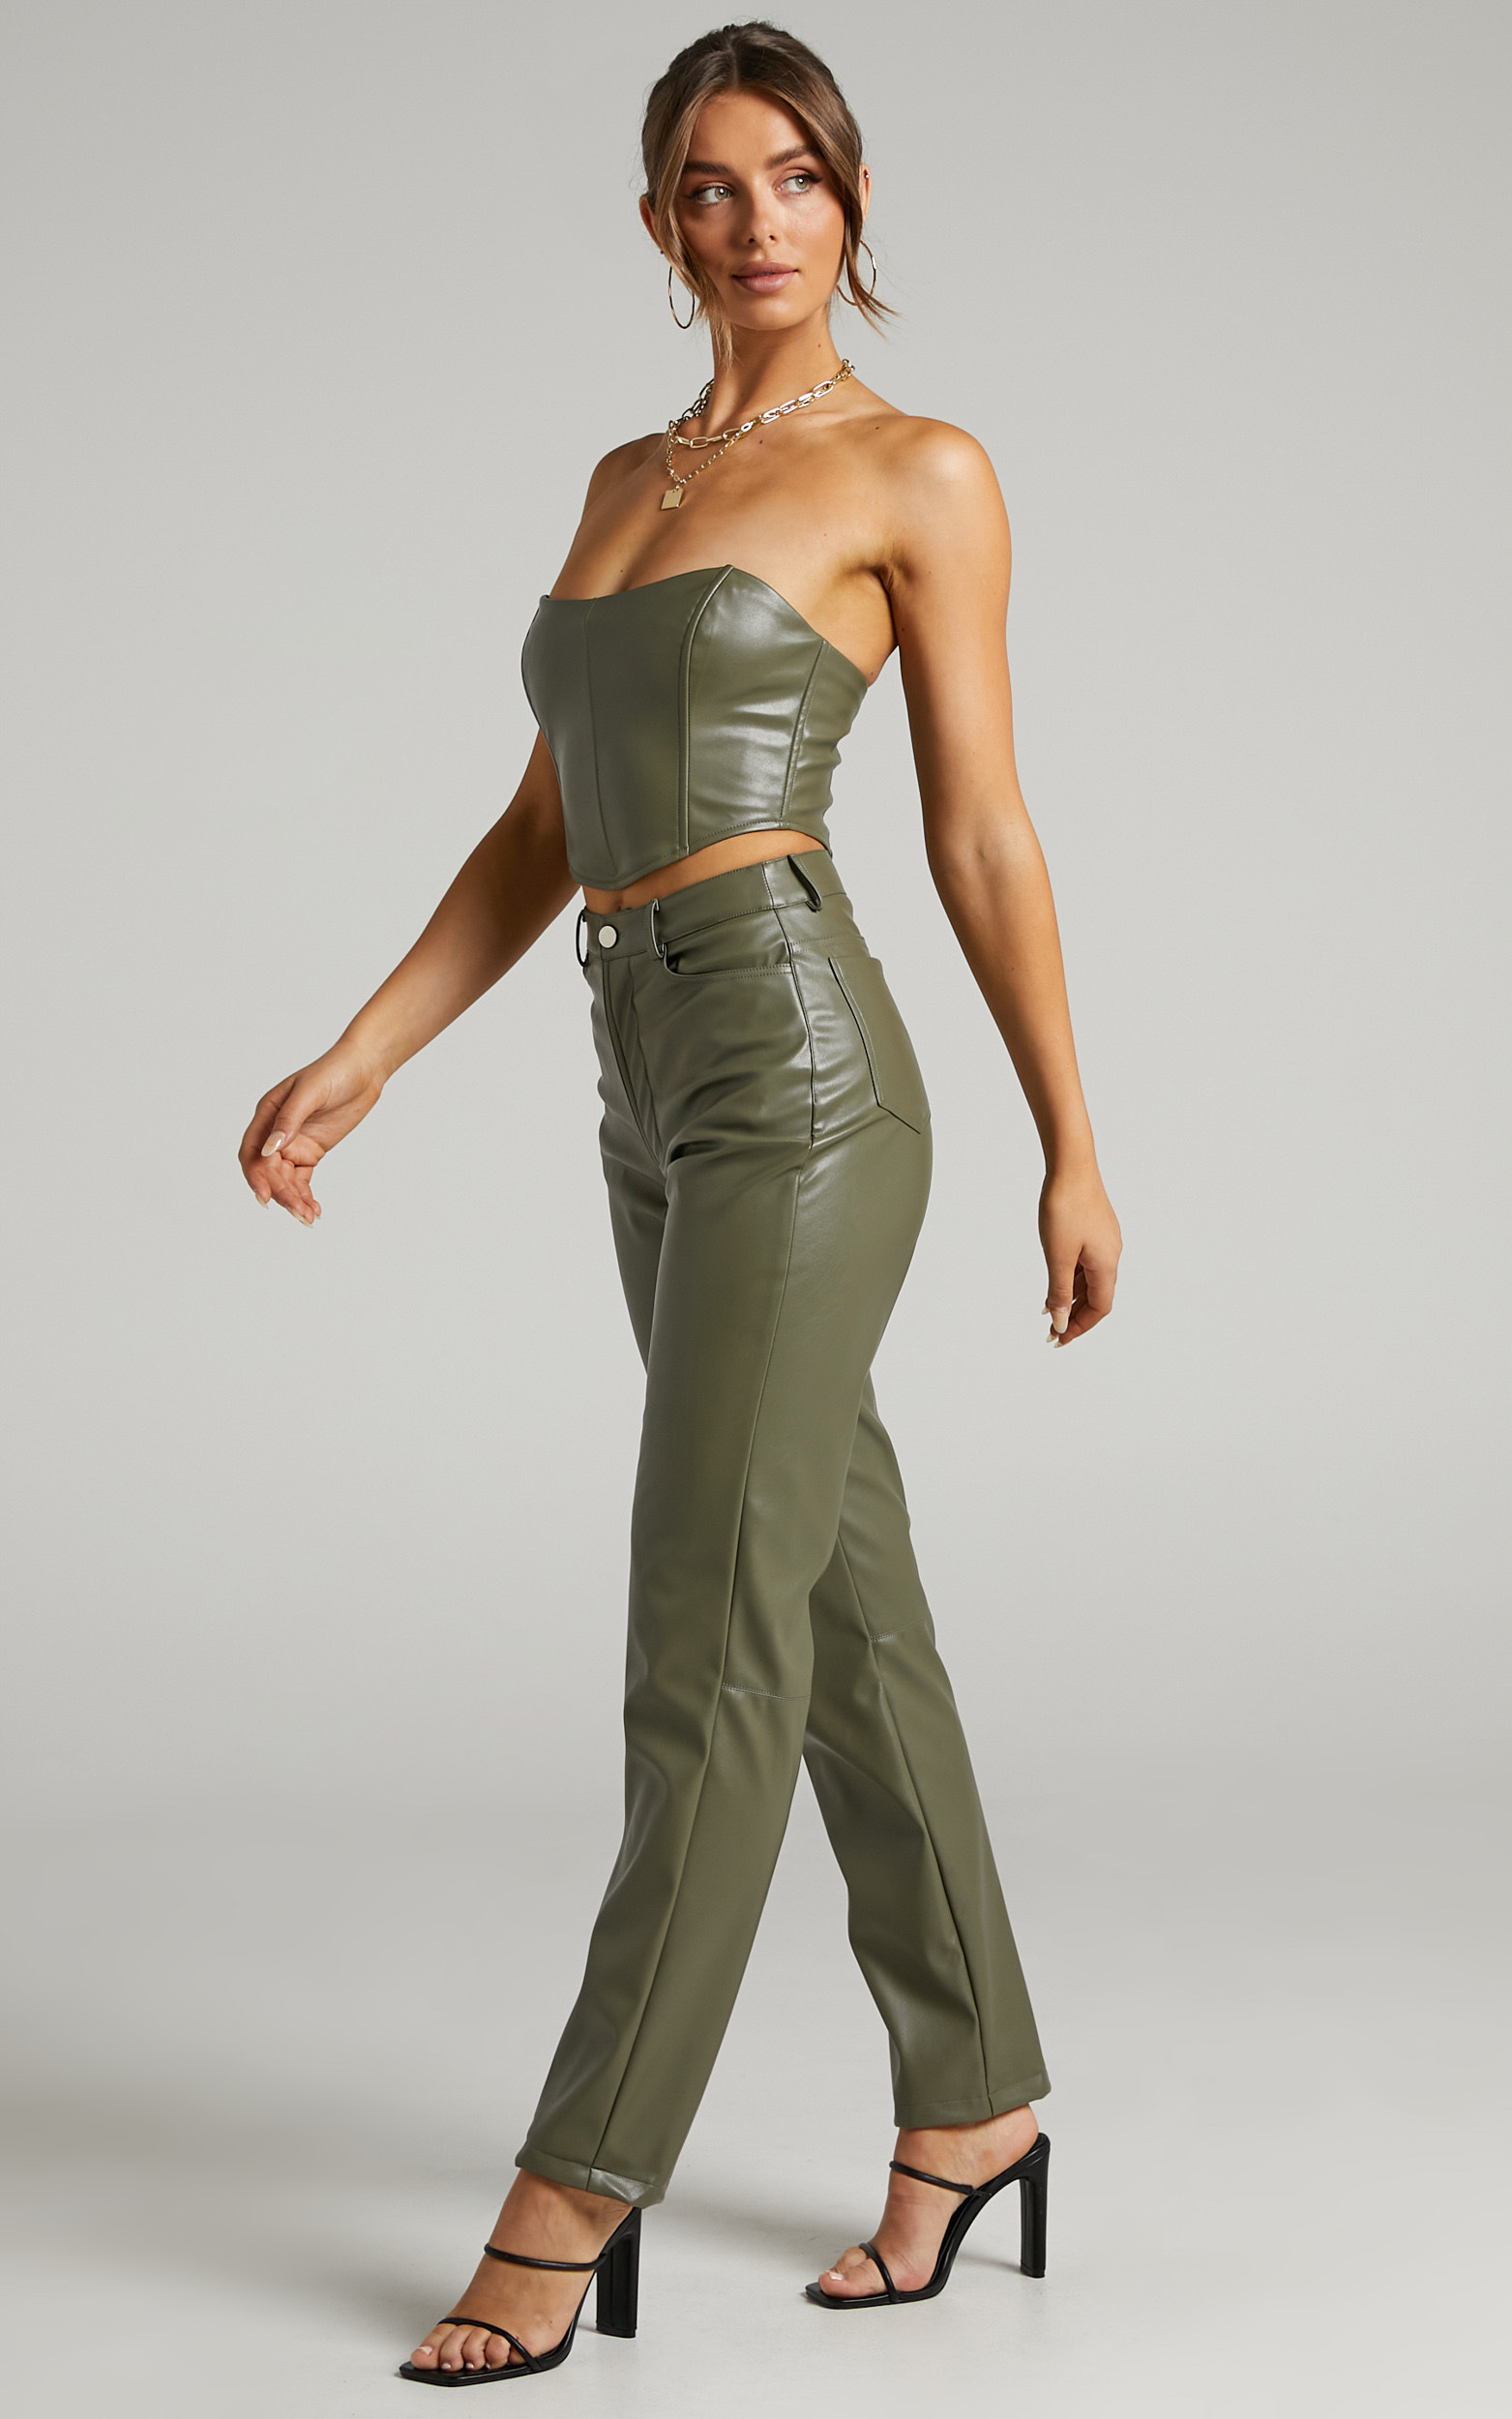 Dilyenne Pants in Olive Leatherette - 06, GRN2, hi-res image number null